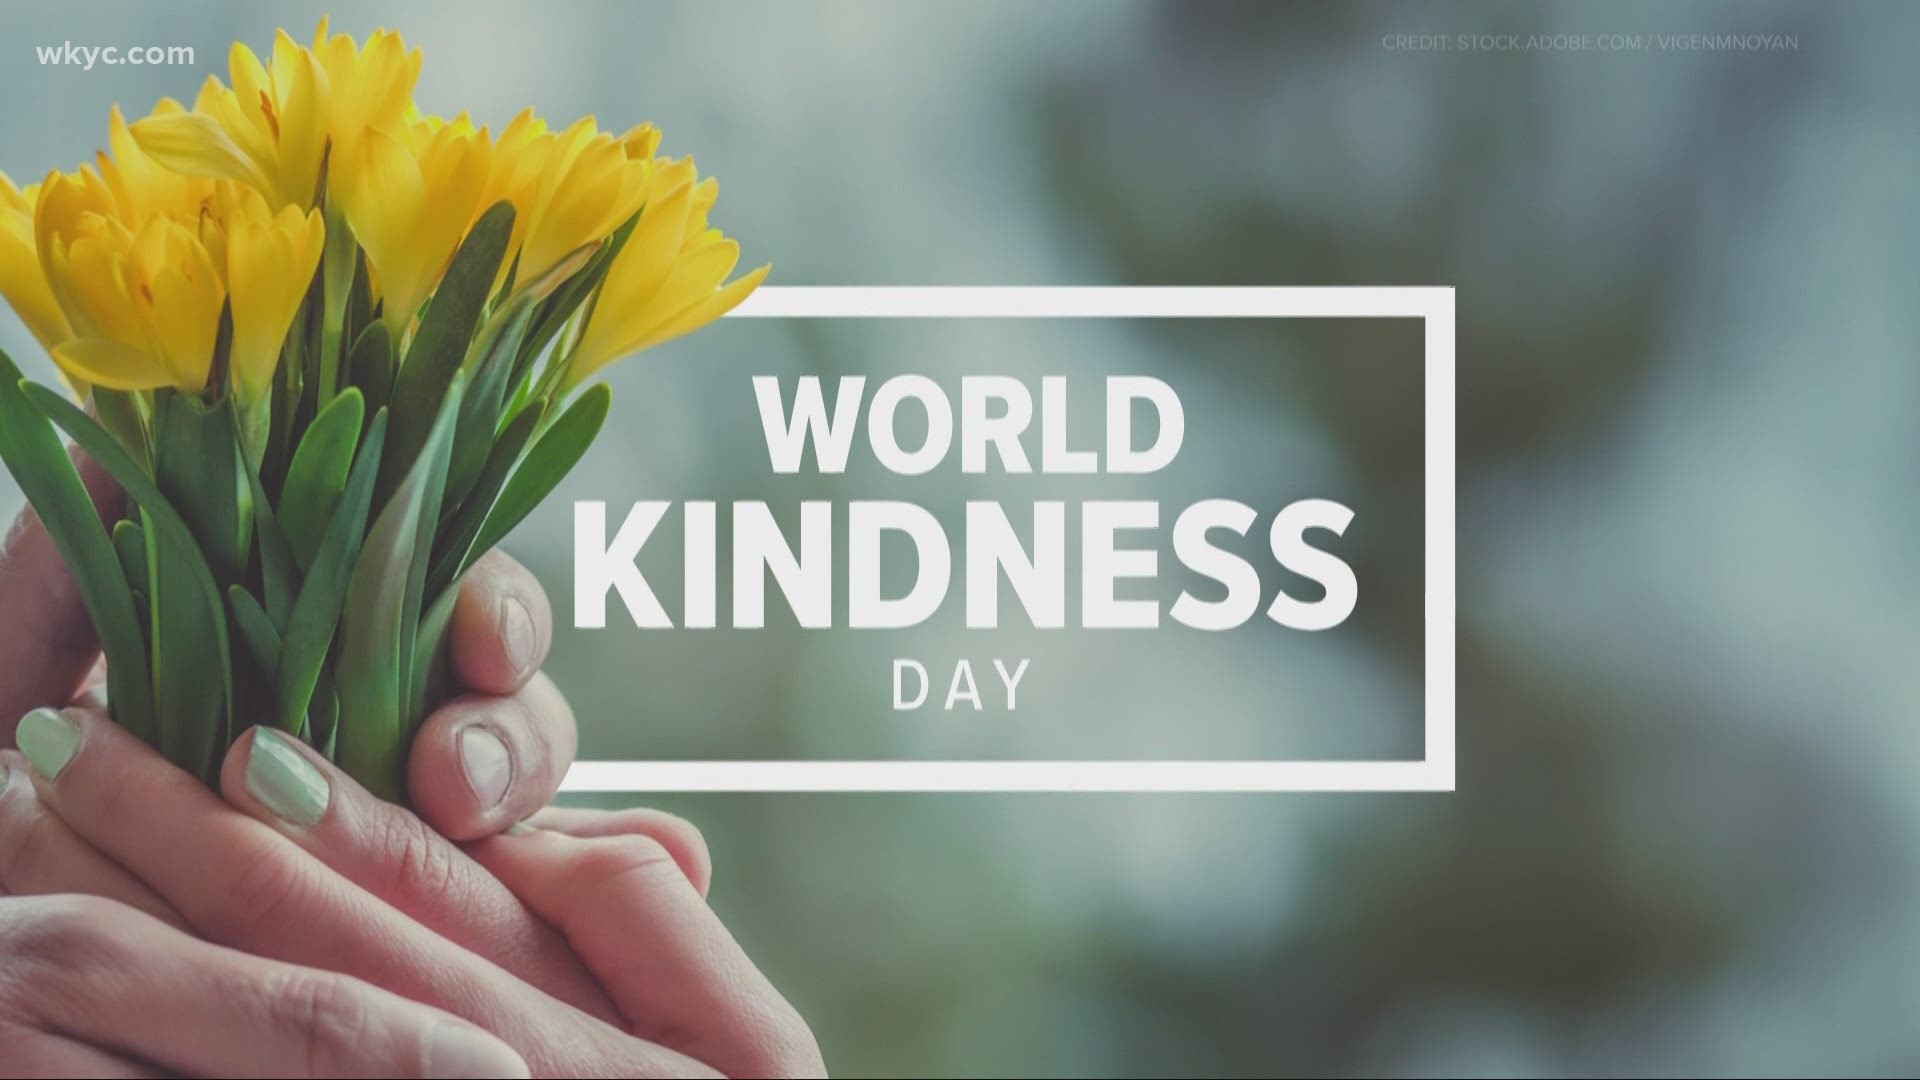 "Let's say we focus on random acts of kindness. We can actually save the world, bit by bit, every day."